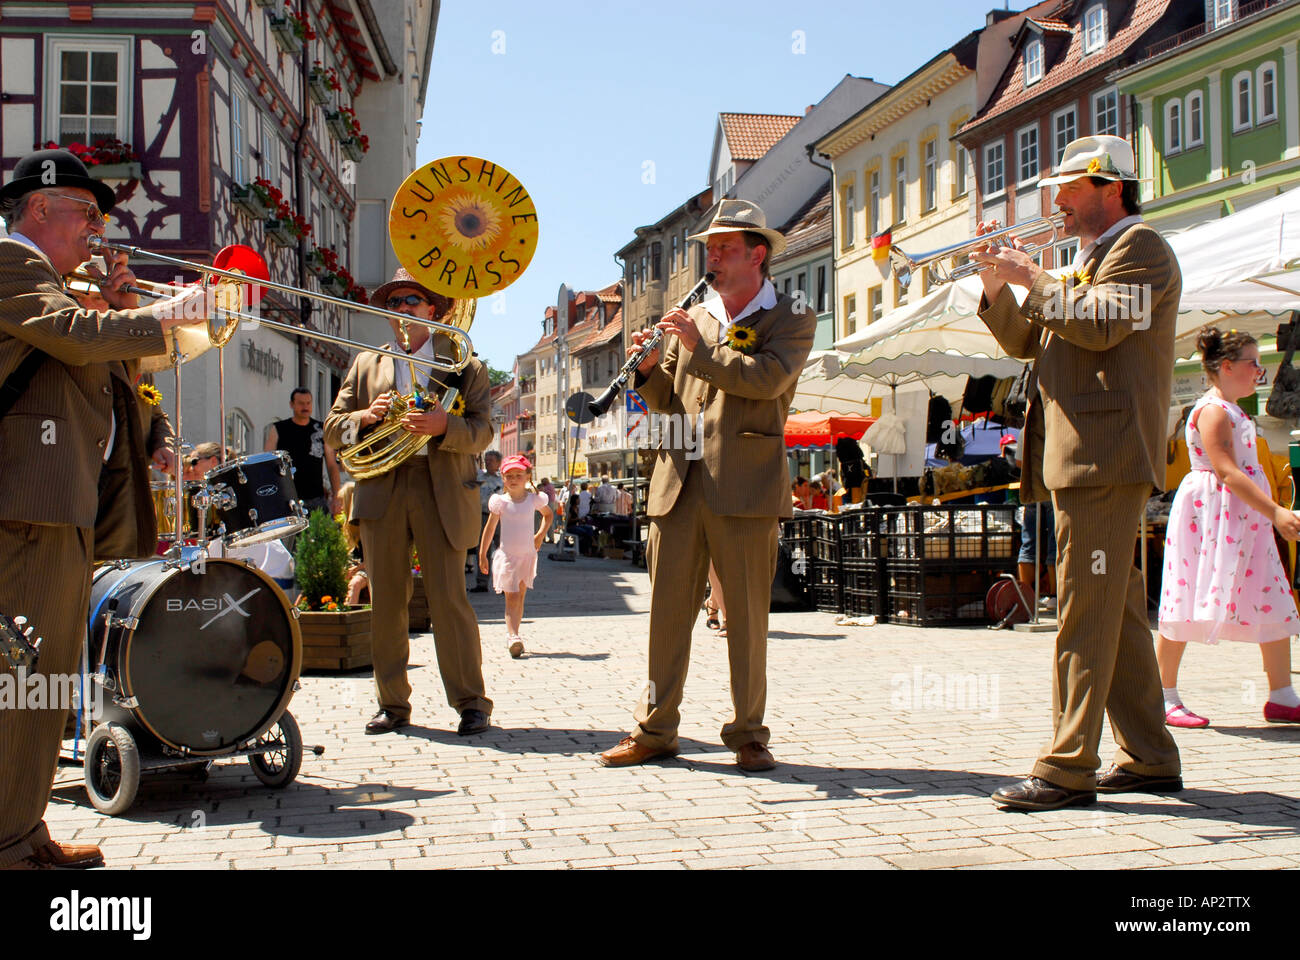 Sunshine Brass Band playing at a festival, Huetesfest in Meiningen, Thuringia, Germany Stock Photo